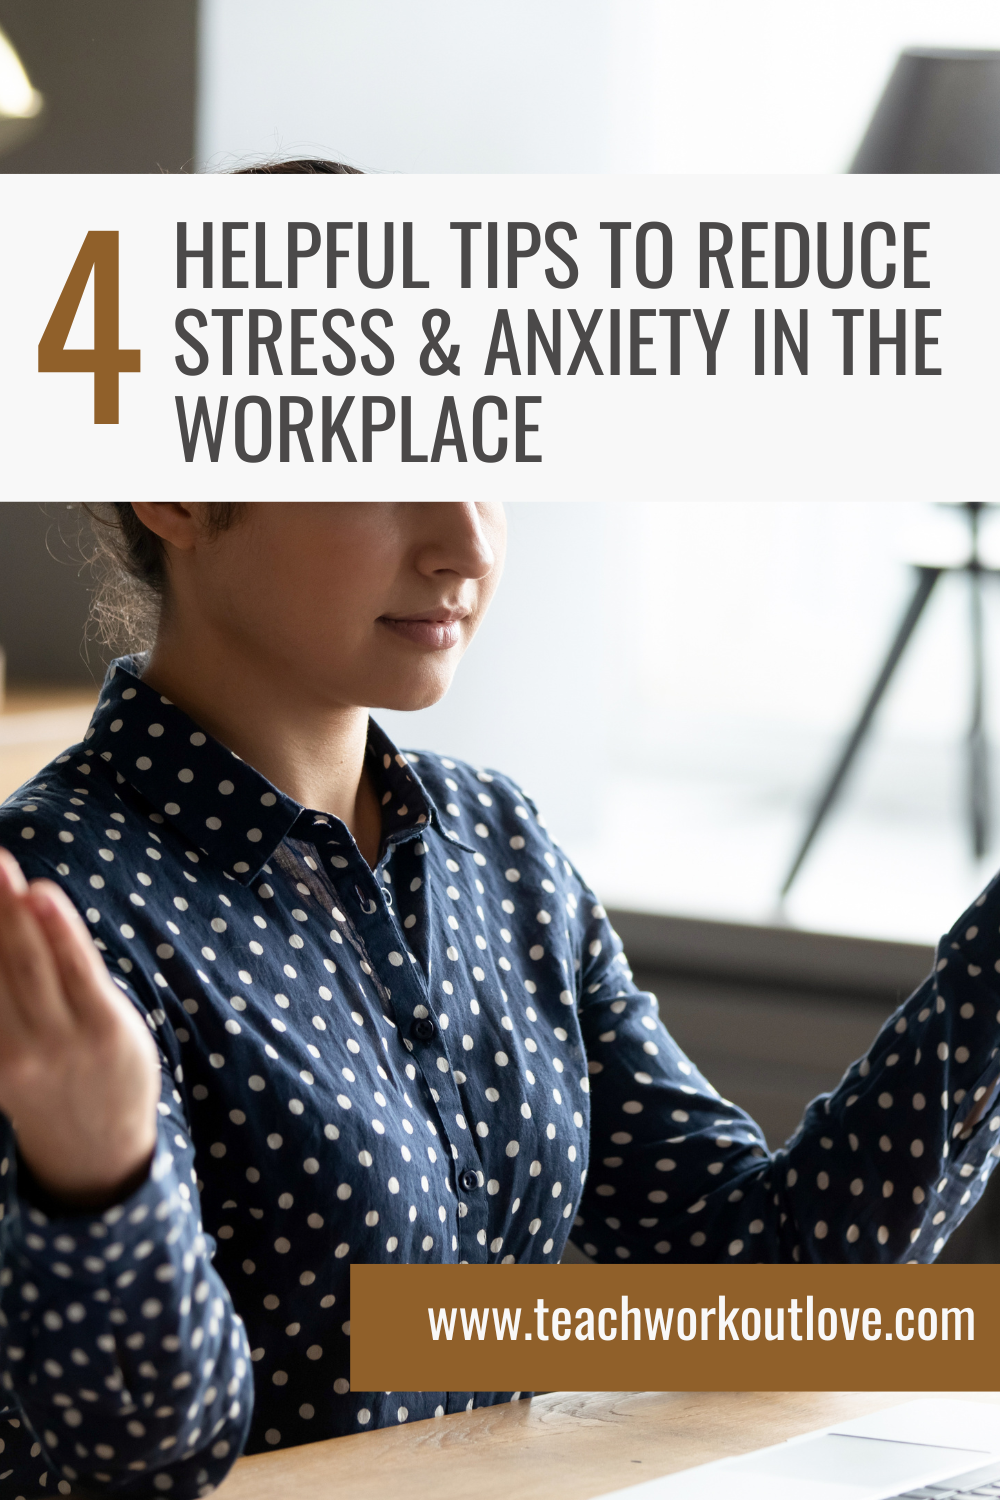 If you can learn to manage and reduce your stress and anxiety levels effectively, you’ll be much more productive and happier. 